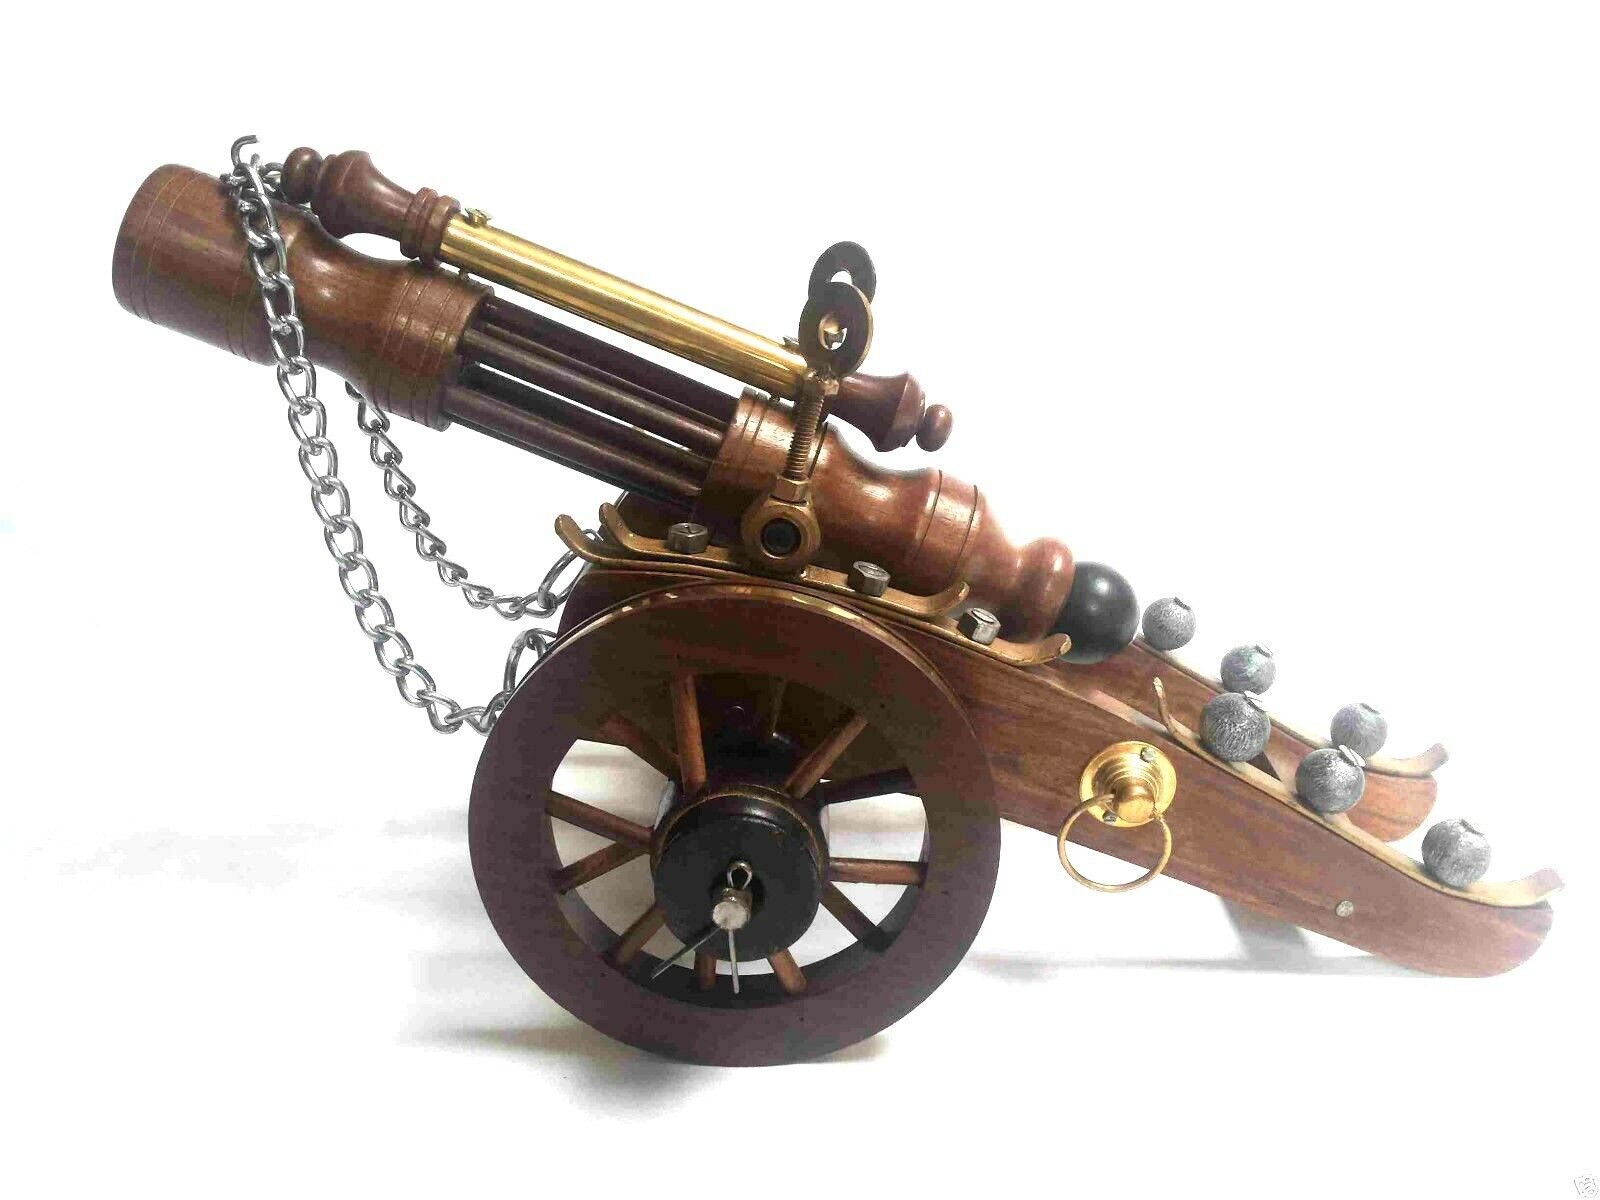 Wooden Brass Cannon Vintage Collectible Home Decorative 19 Inch